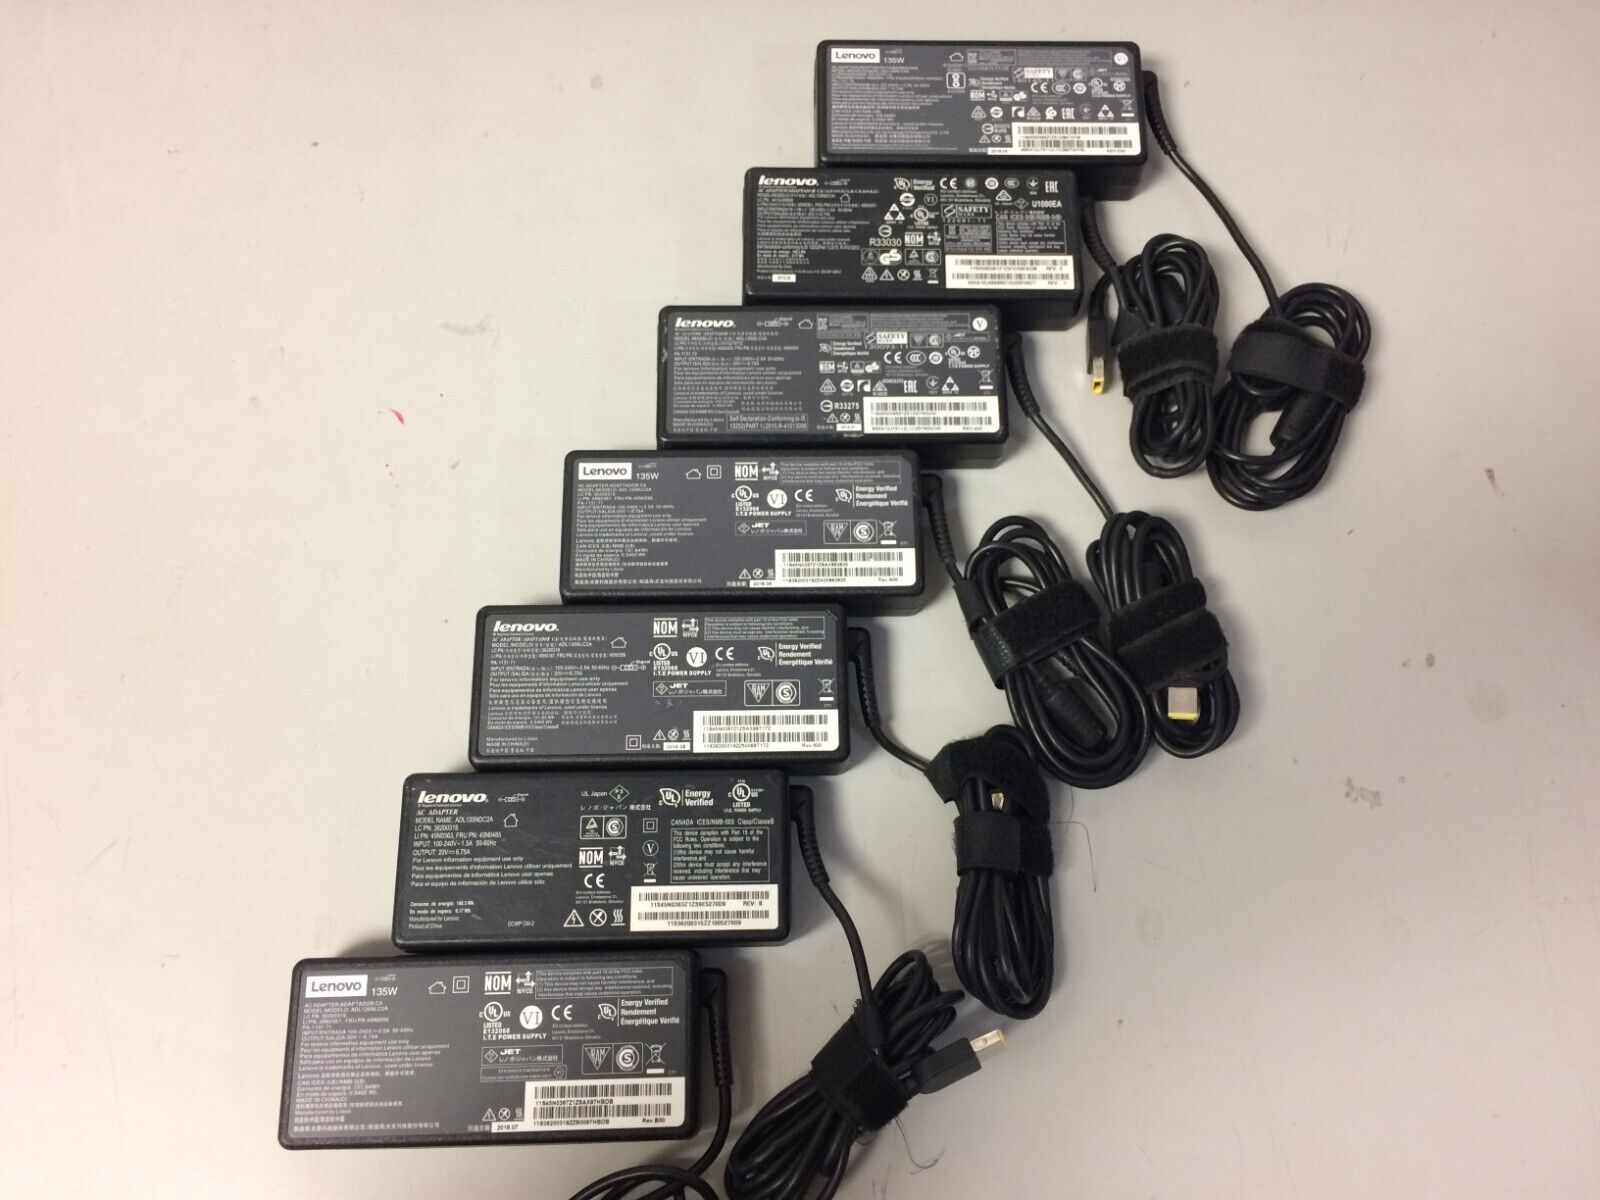 LOT of 7 OEM Lenovo 135W 20V 6.75A AC Power Adapters (Square/Rectangle Jack)